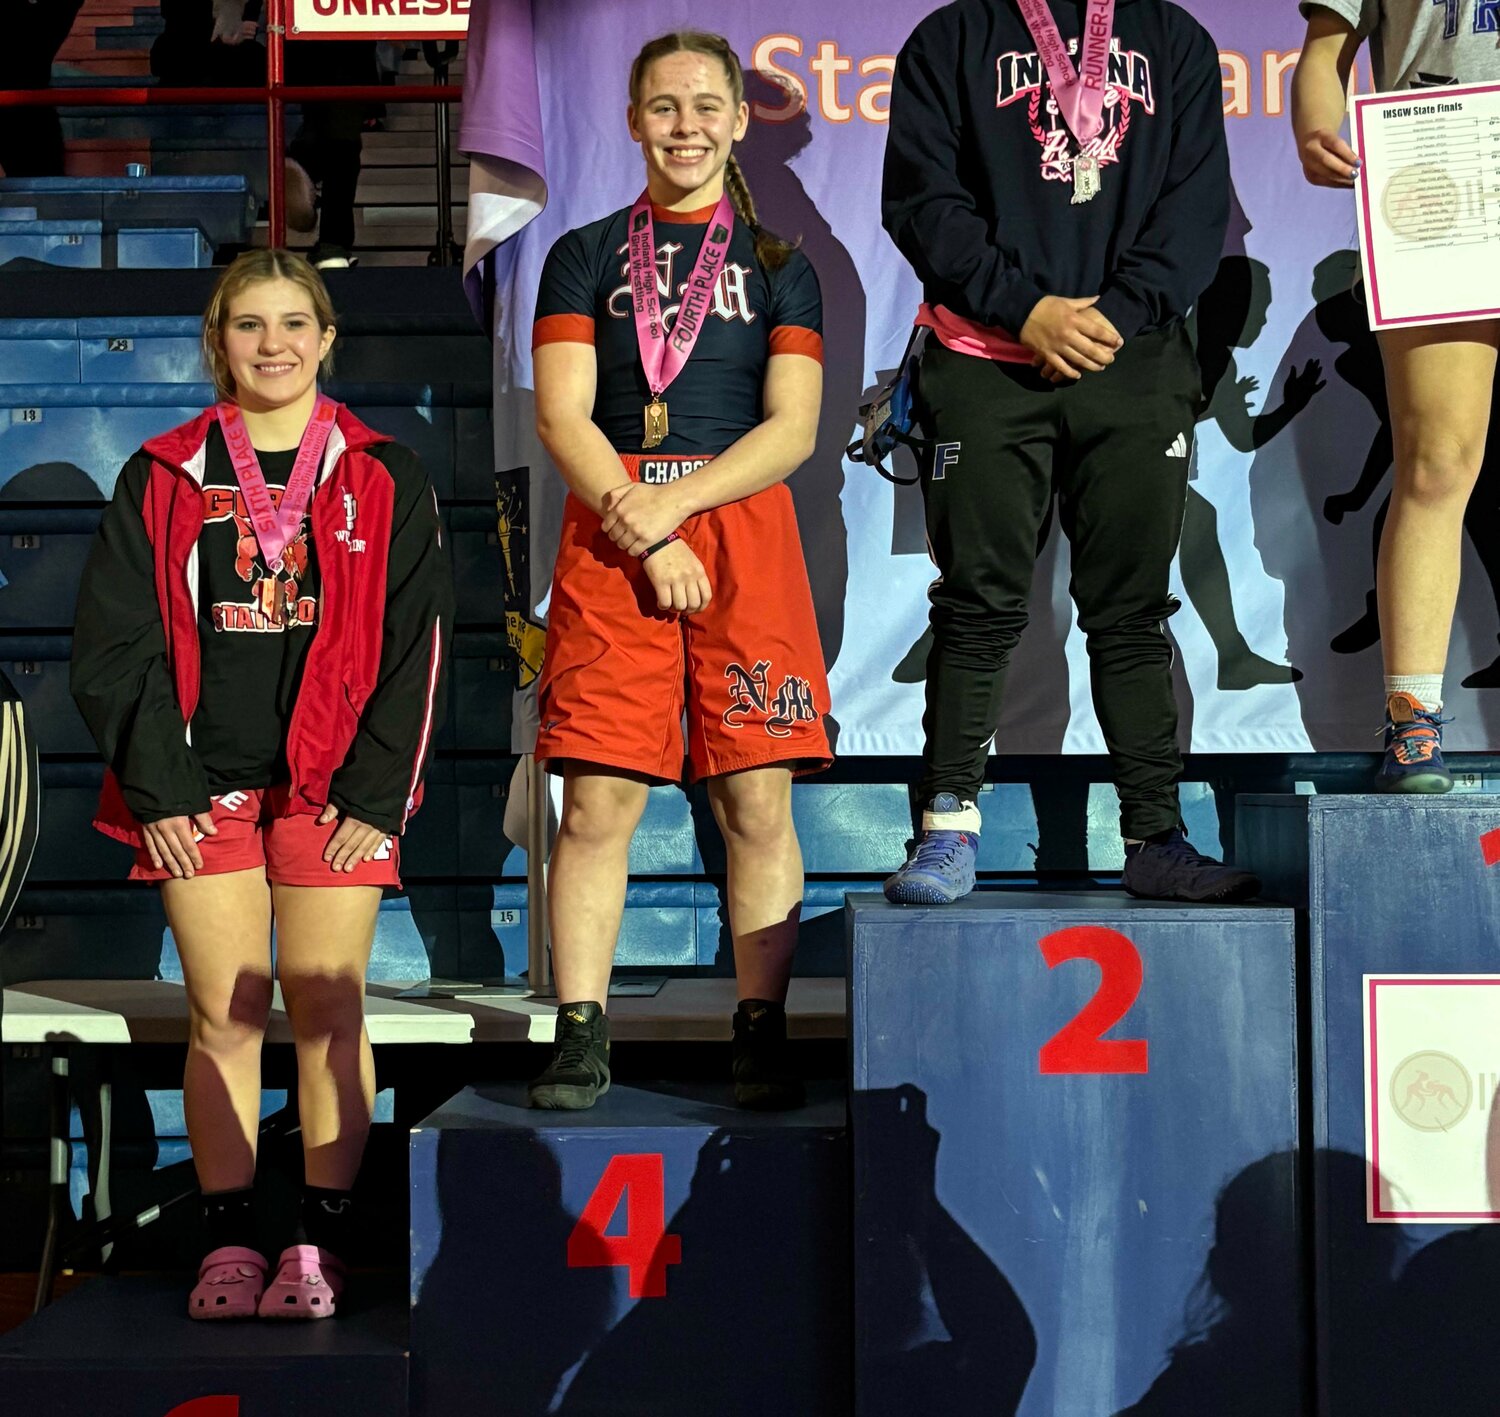 North Montgomery's Hailey Kunz proved why she's one of the top girls wrestlers at 145 pounds with a 4th place finish at the Girls Wrestling State Finals.